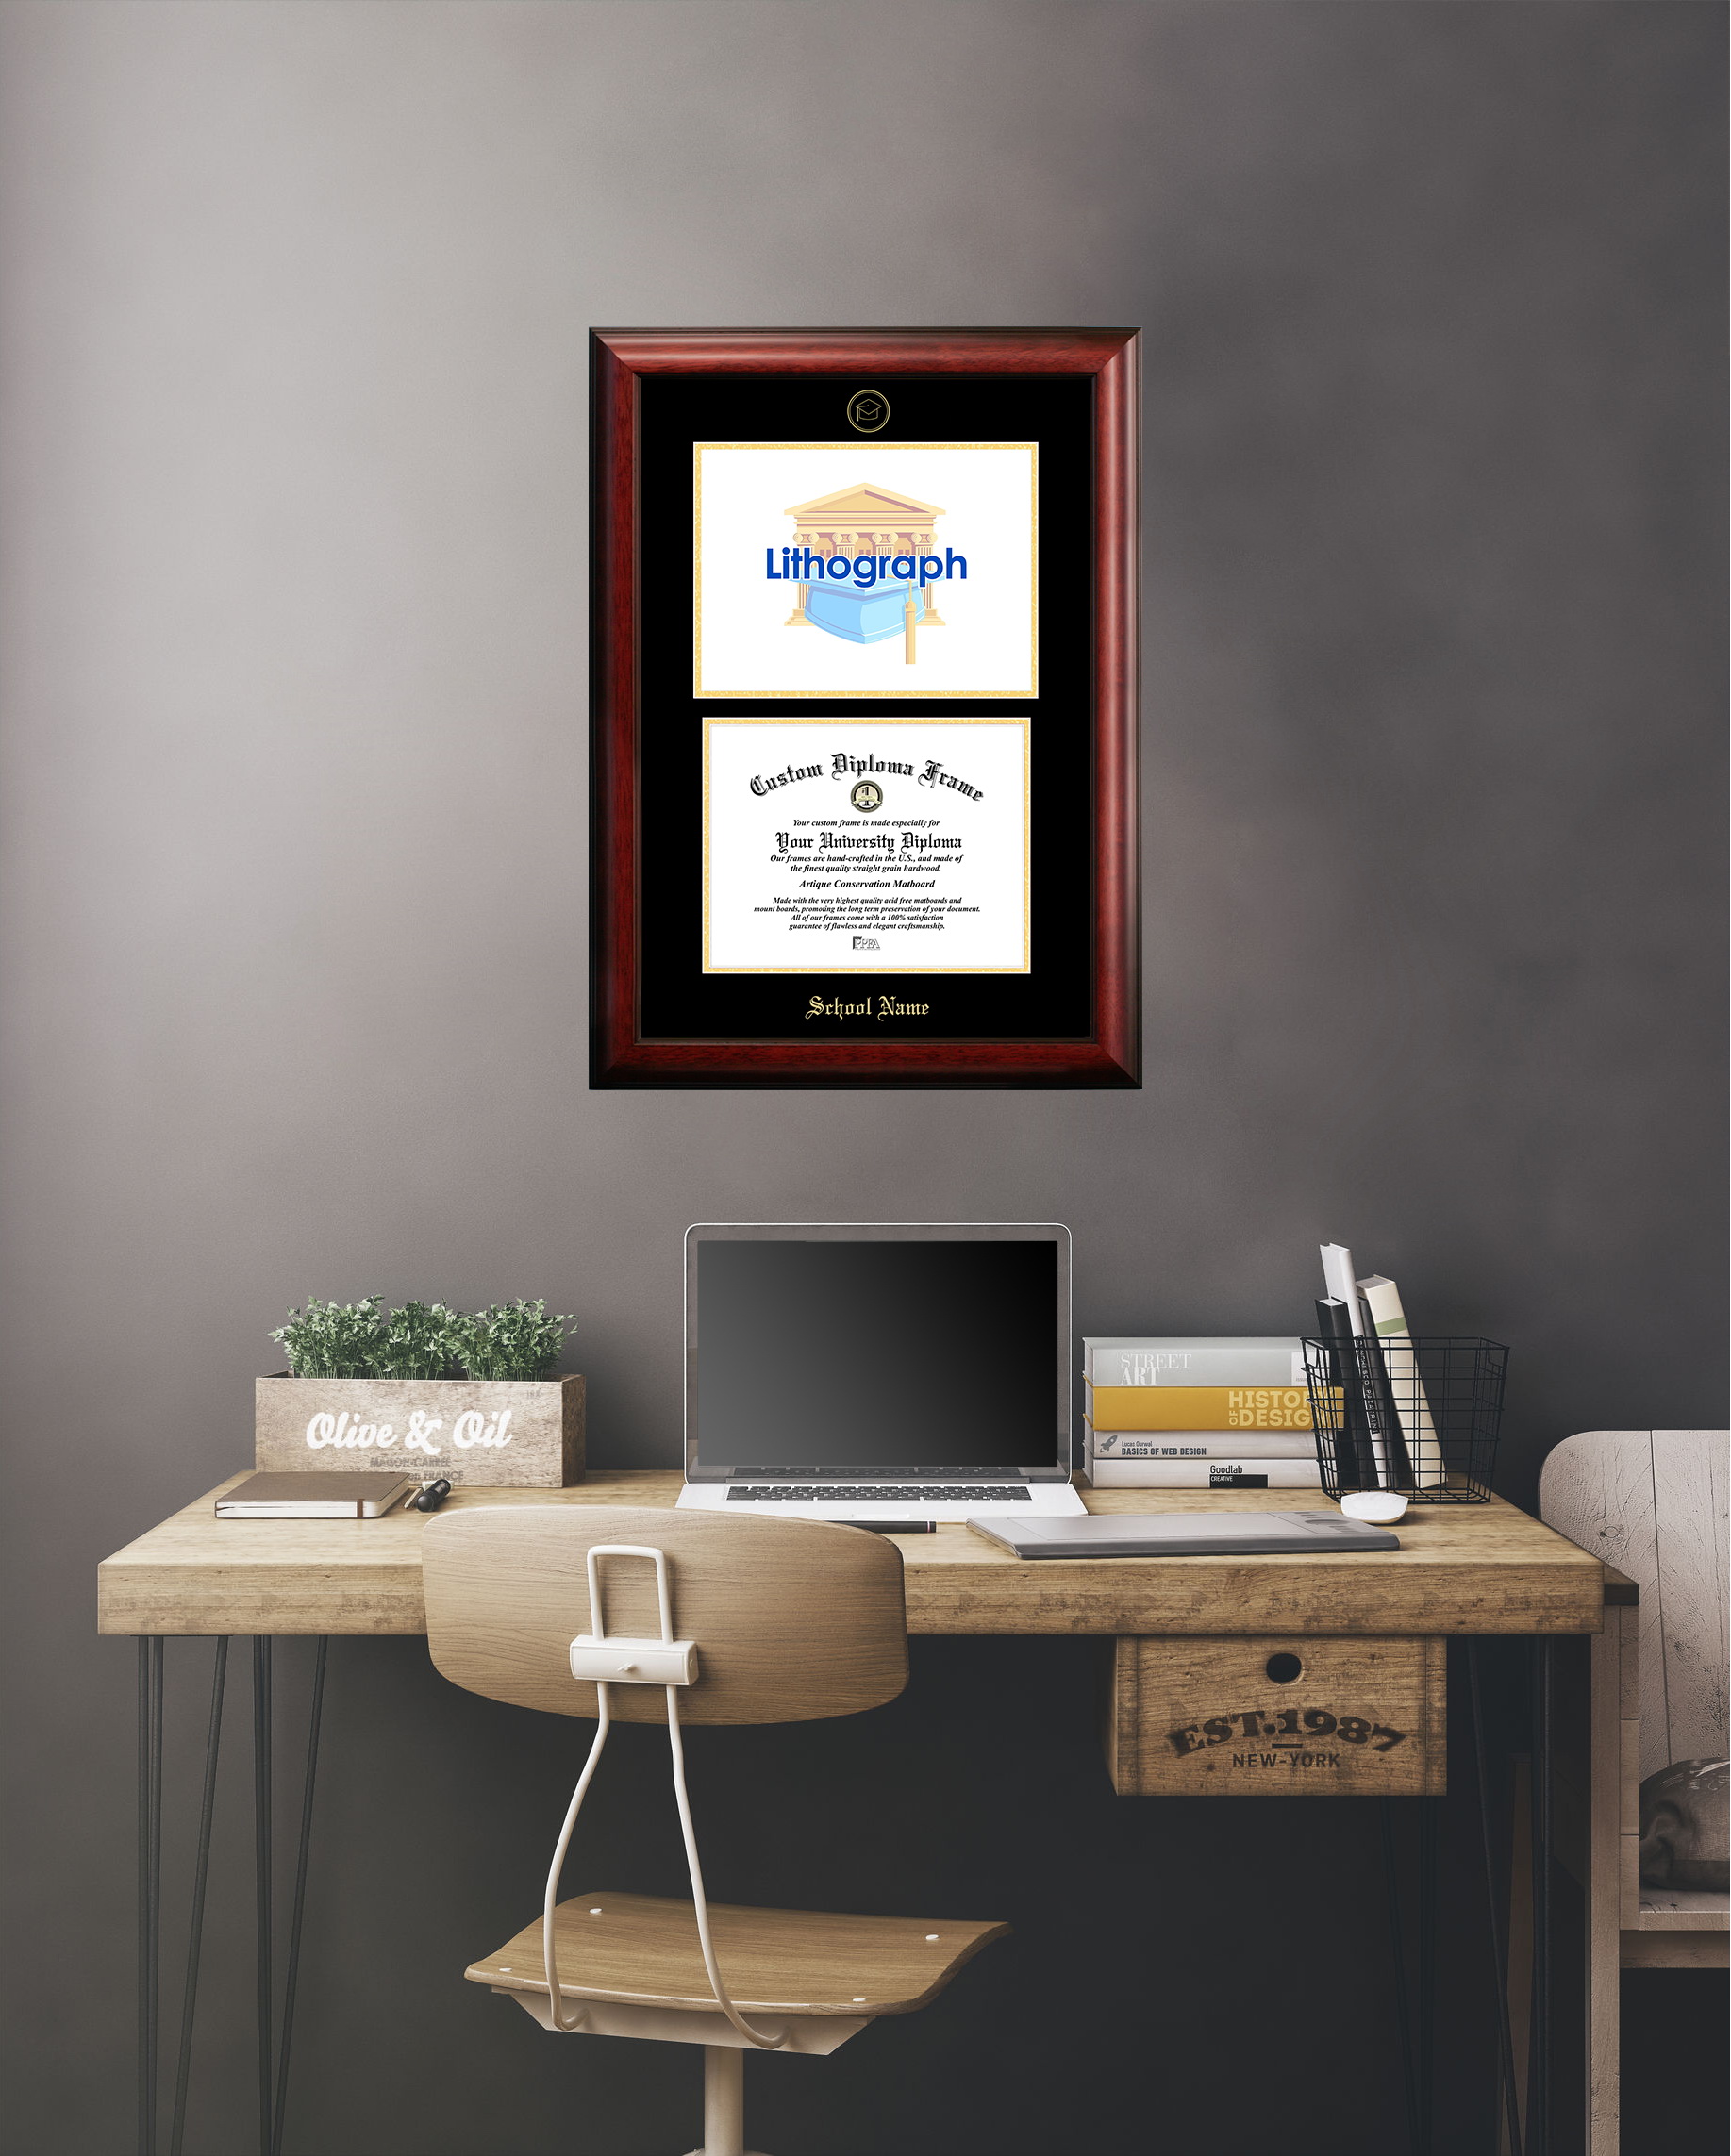 Campus Images AZ996LSED-1185 University of Arizona 11w x 8.5h Silver Embossed Diploma Frame with Campus Images Lithograph